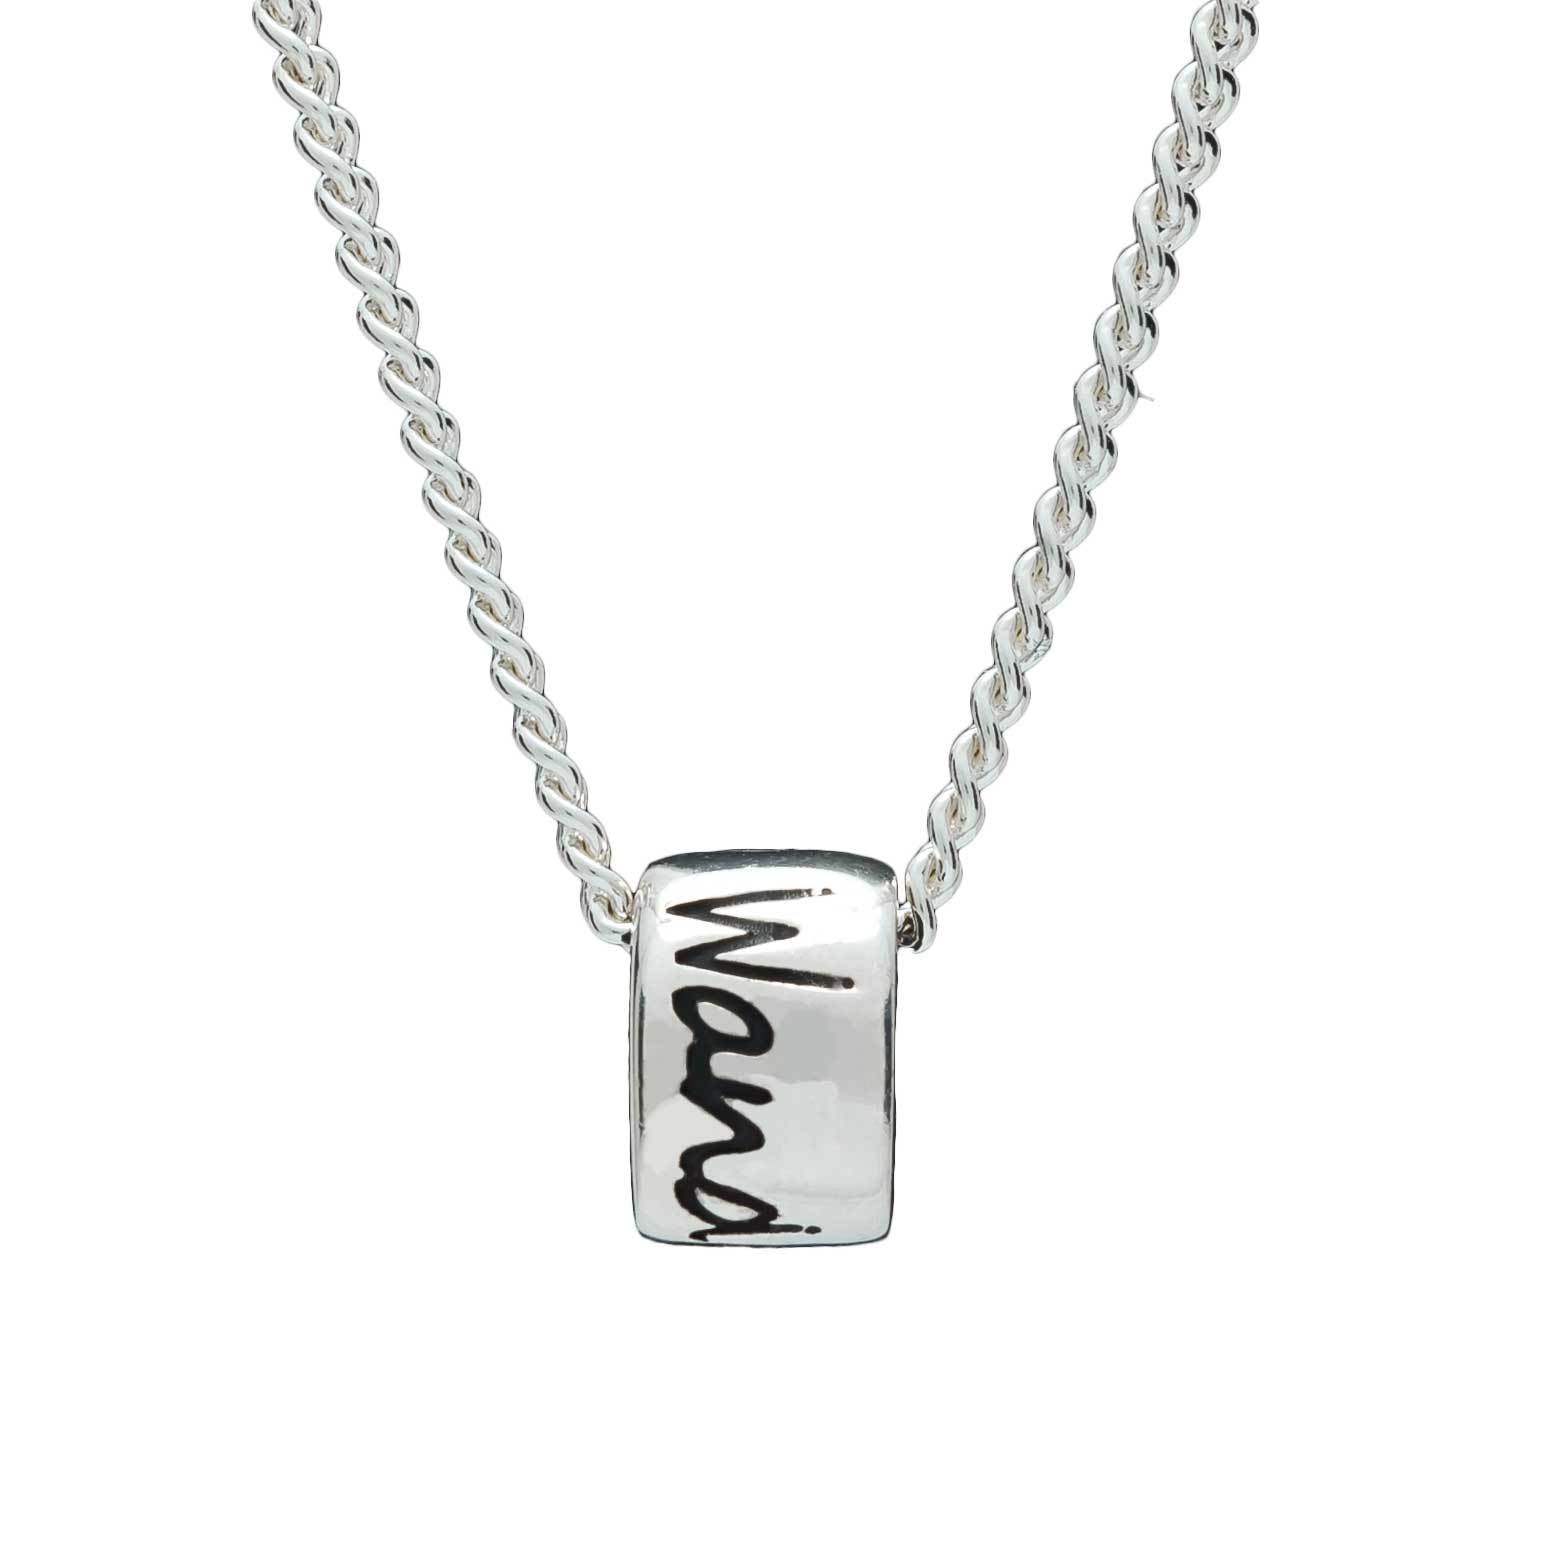 Wanderlust silver necklace for men & women - gap year travel gift alternative to a silver saint Christopher